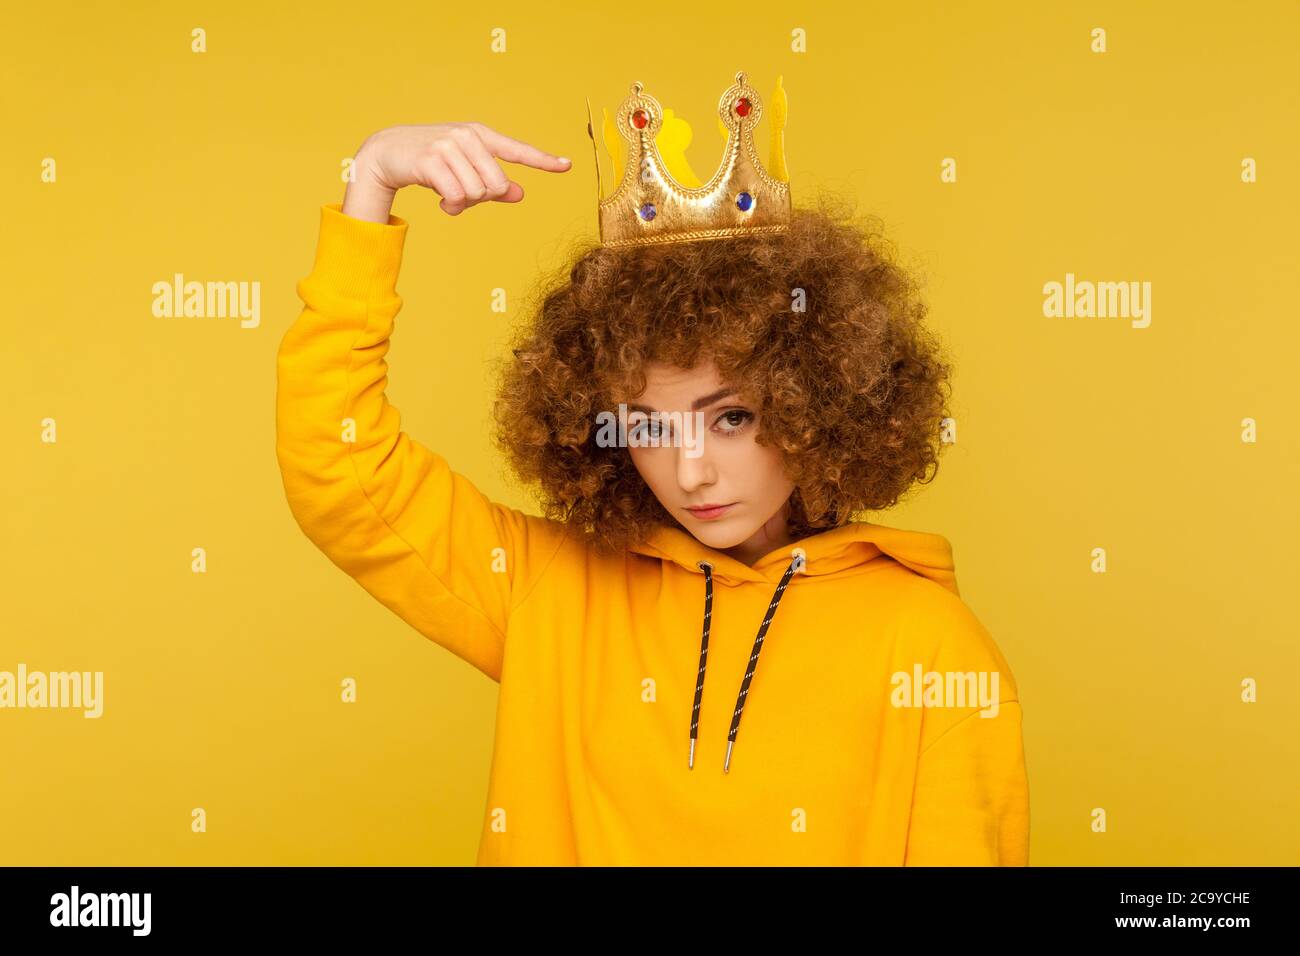 Look, I am best! Selfish haughty curly-haired woman pointing at crown on head and looking with arrogance supercilious, being egoistic with over-inflat Stock Photo